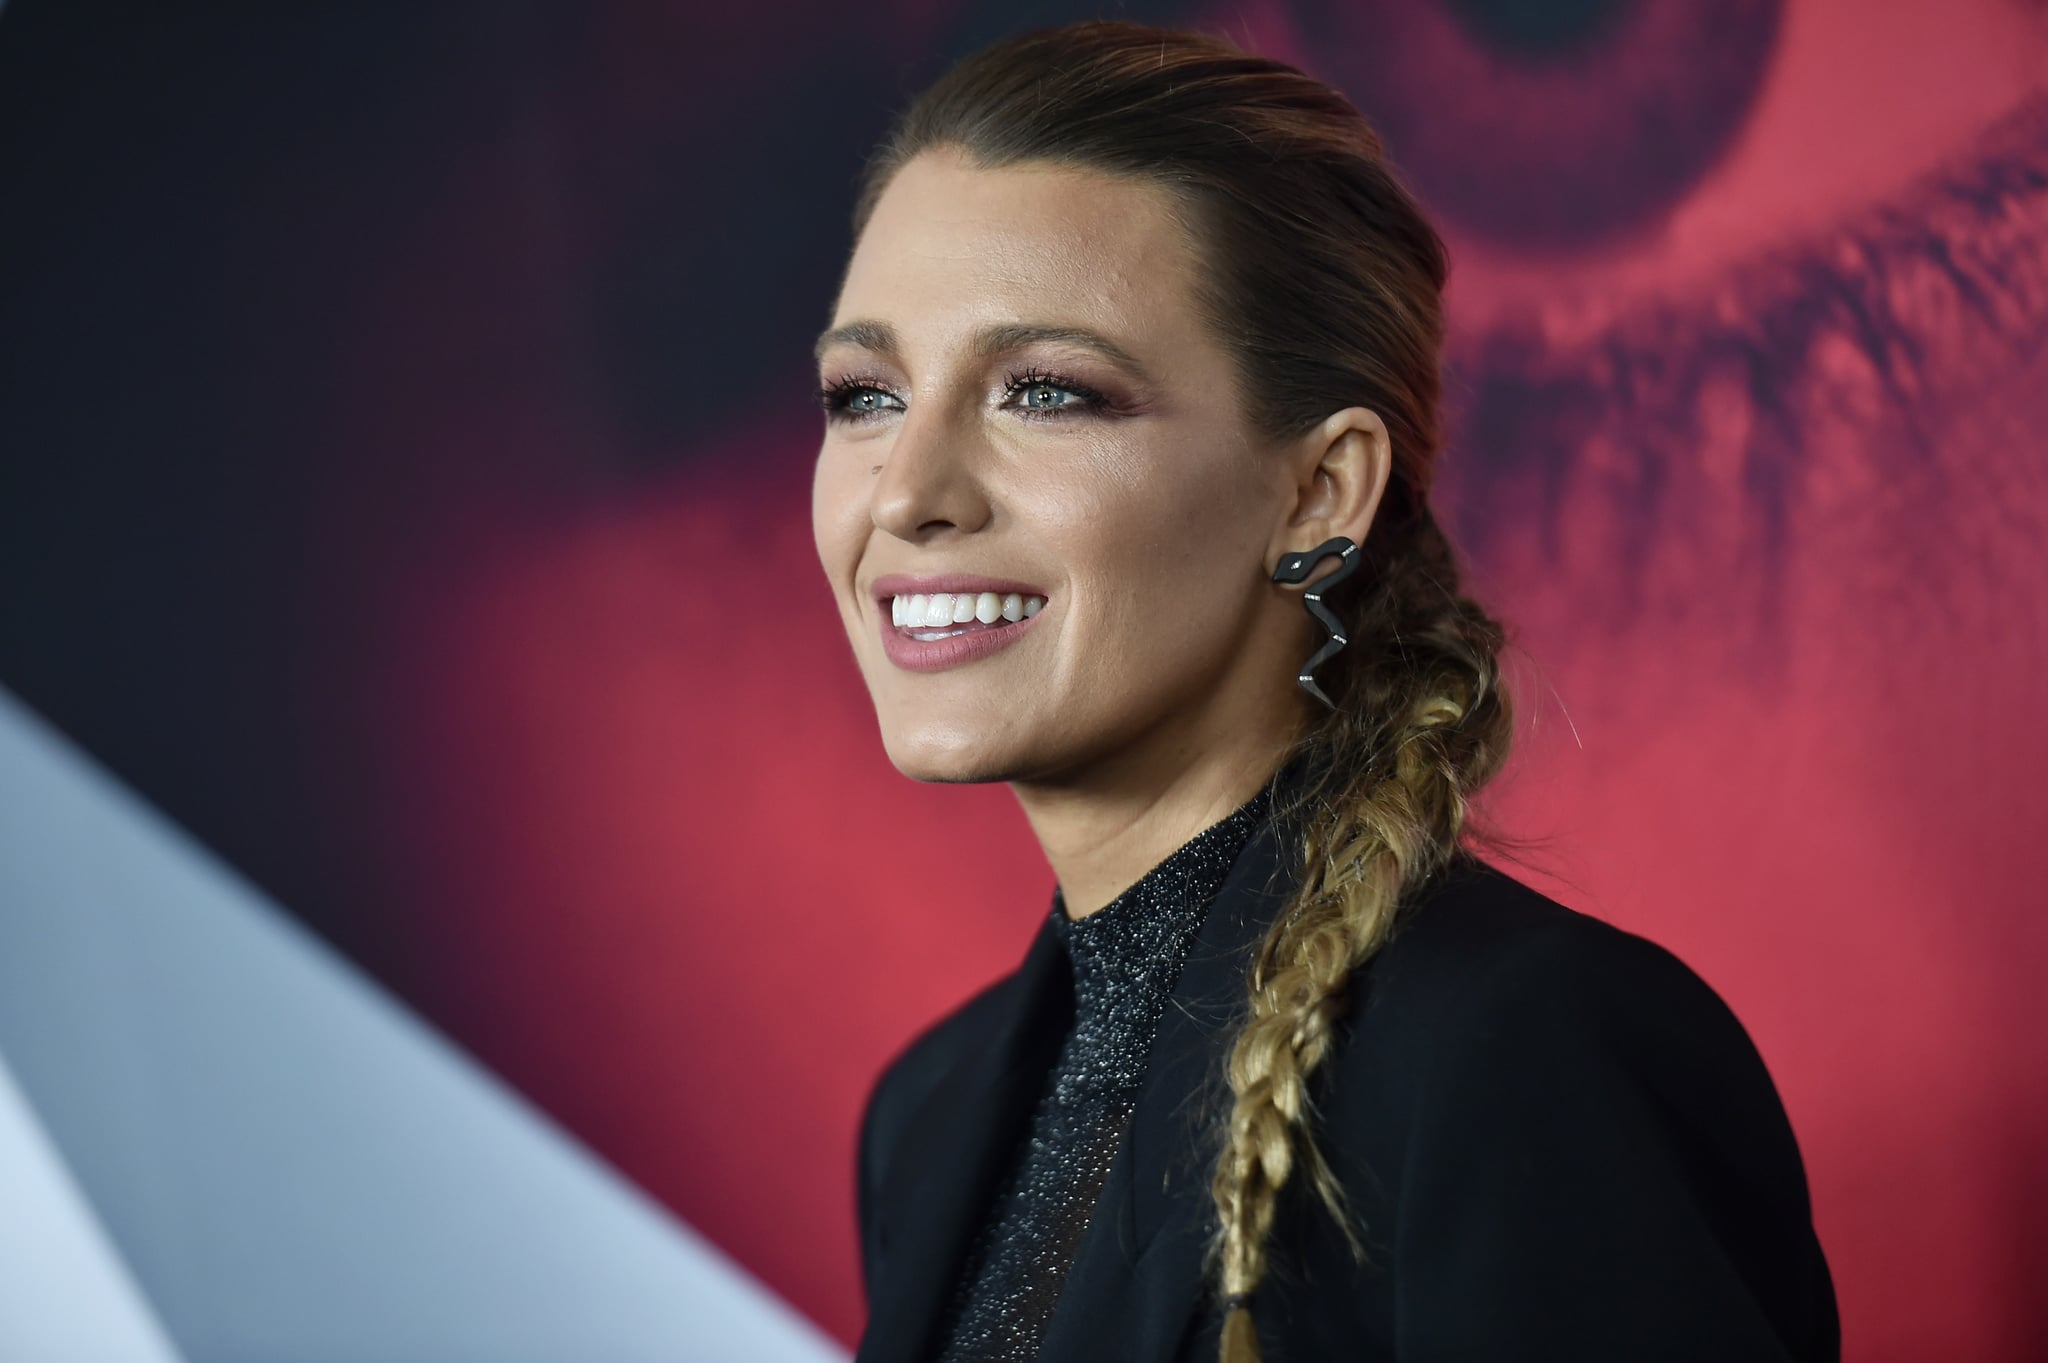 Did Blake Lively Receive An Inappropriate Compliment About Her Appearance